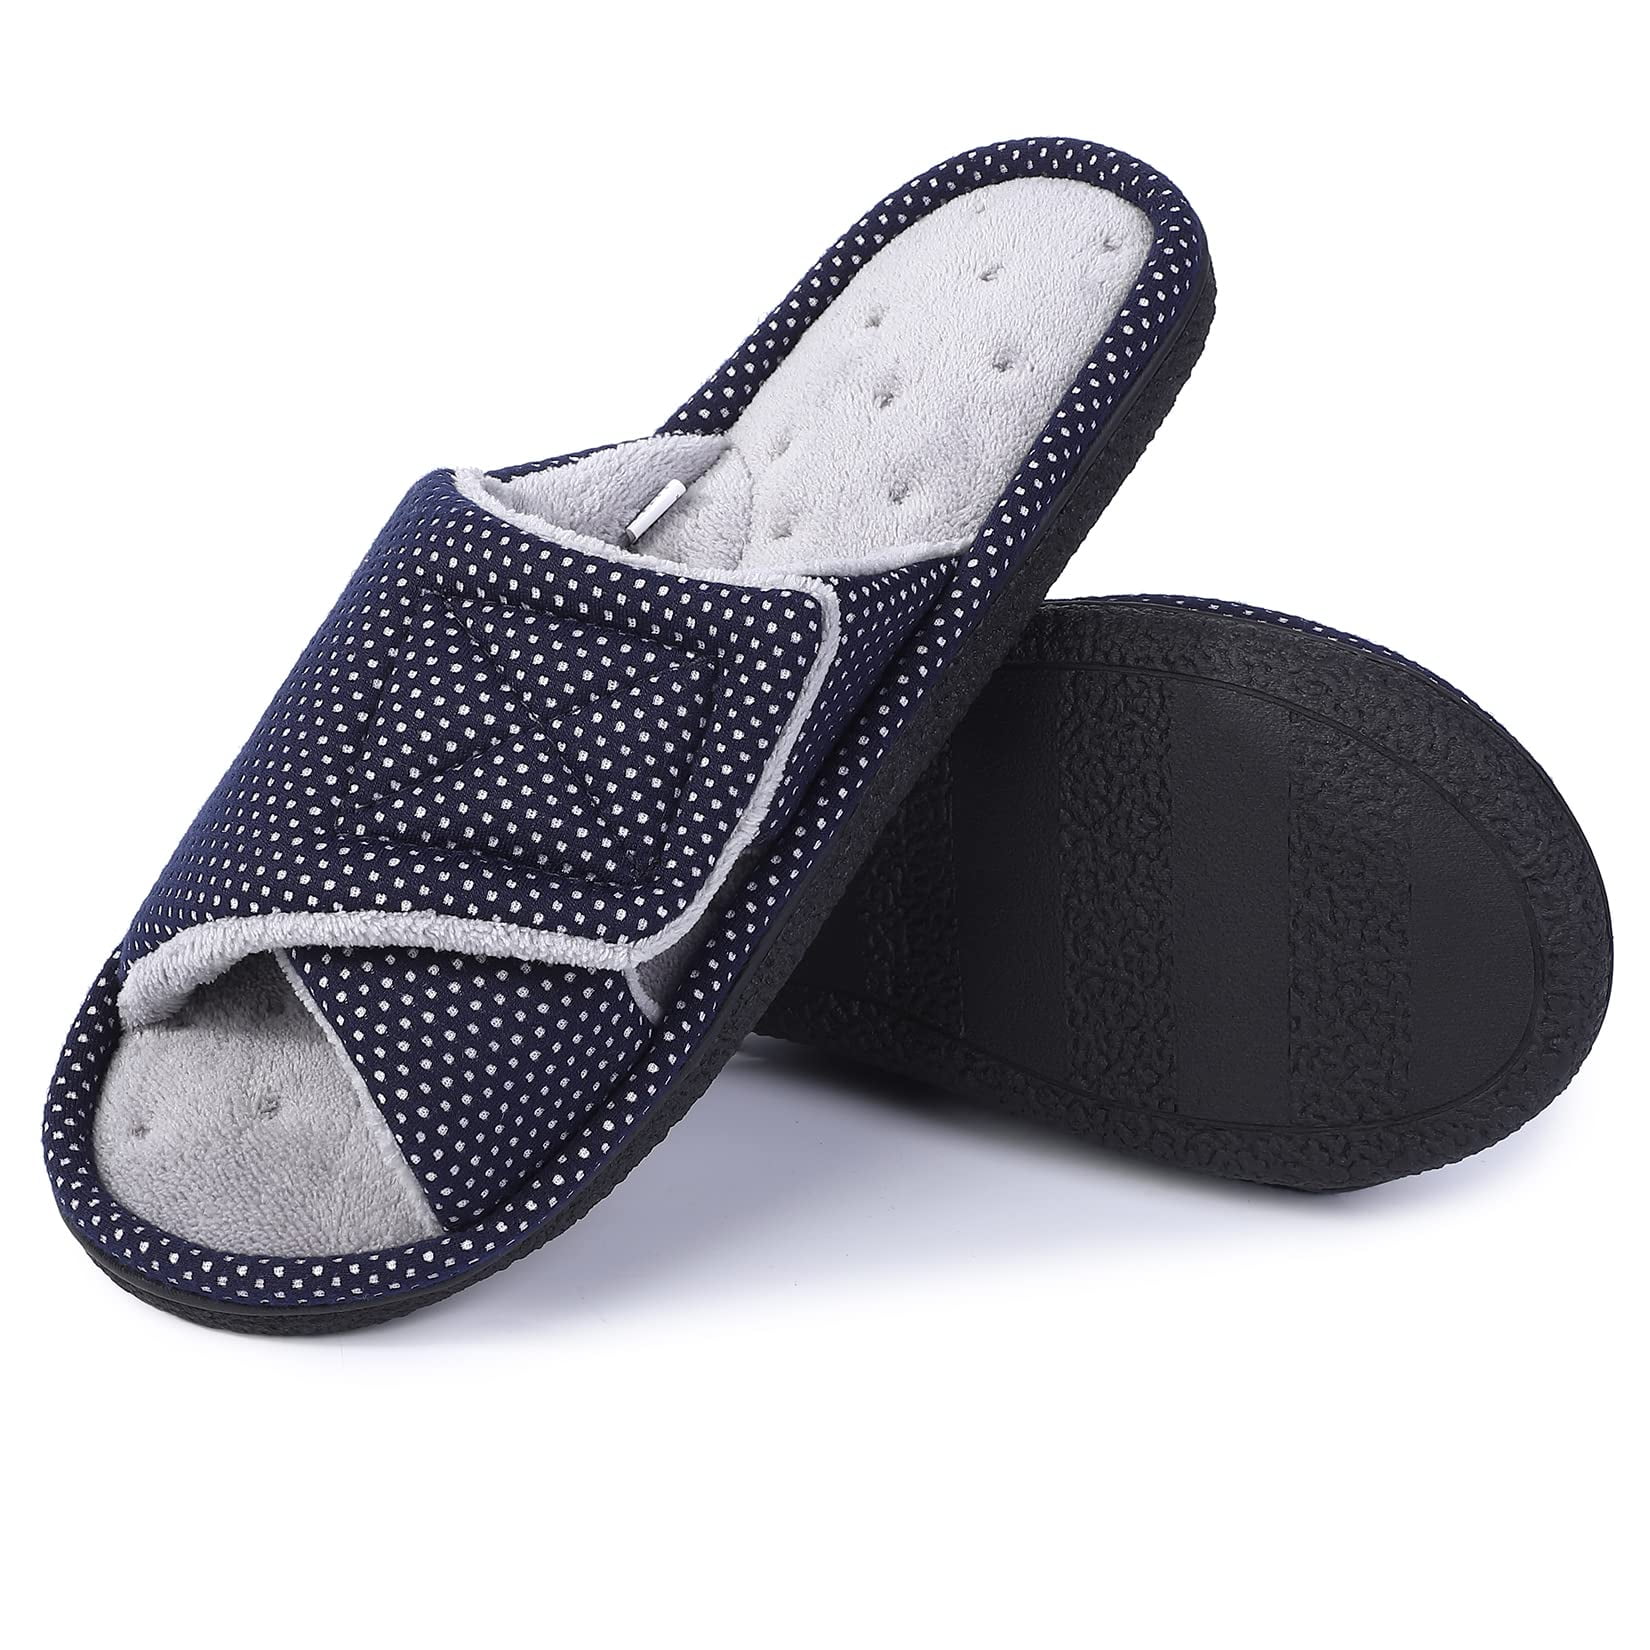  House Slippers for Women Indoor Outdoor Ladies Summer Criss  Cross Band House Shoes with Memory Foam used in Bedroom Comfy Breathable